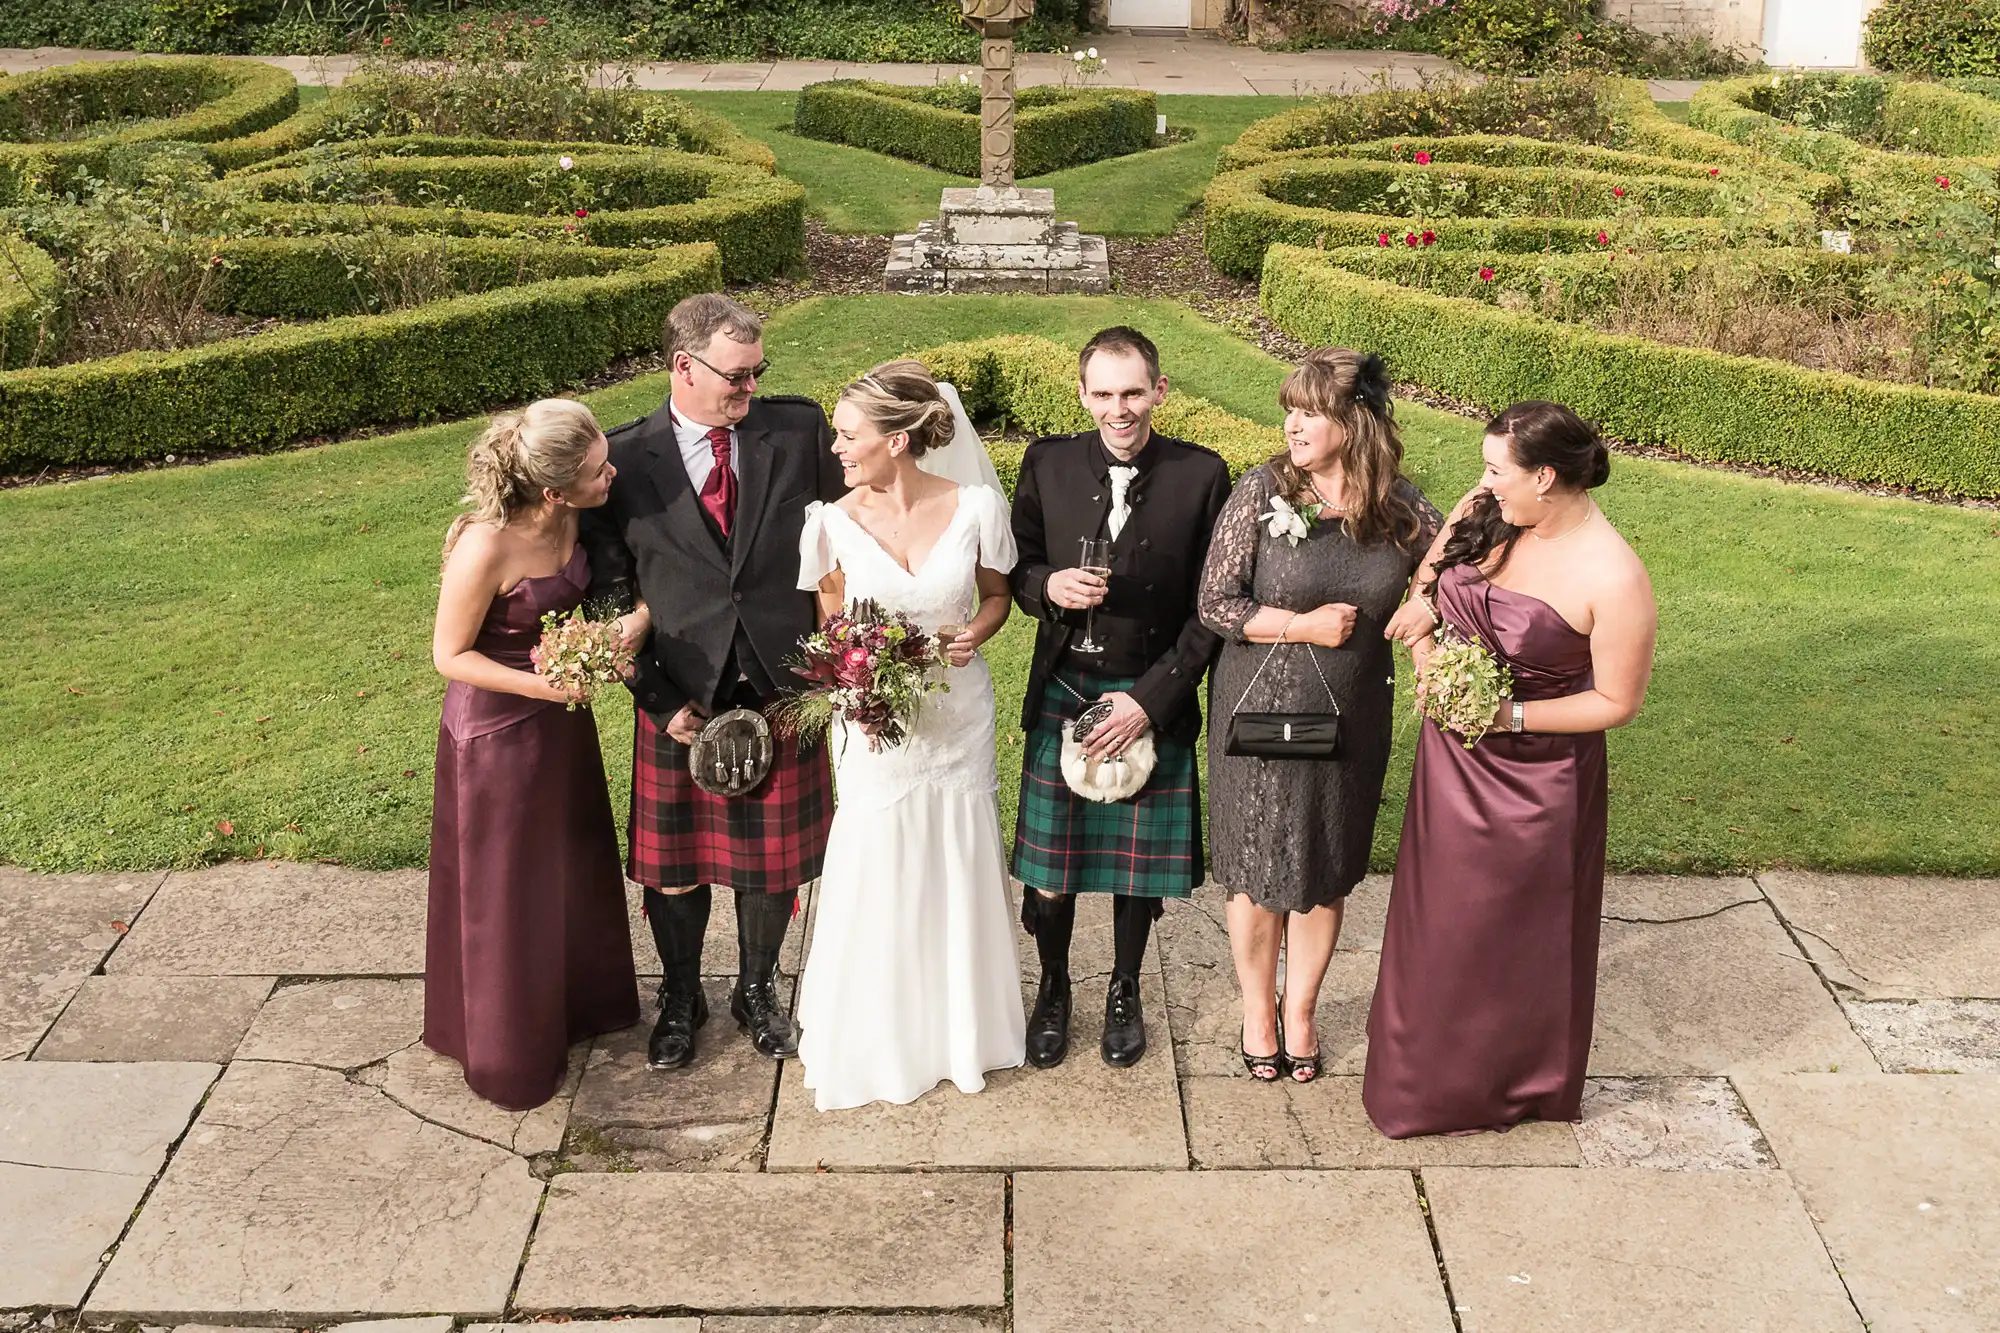 A wedding group photo in a garden, featuring a bride and groom with four guests, two men in kilts and three women in burgundy dresses, holding bouquets.